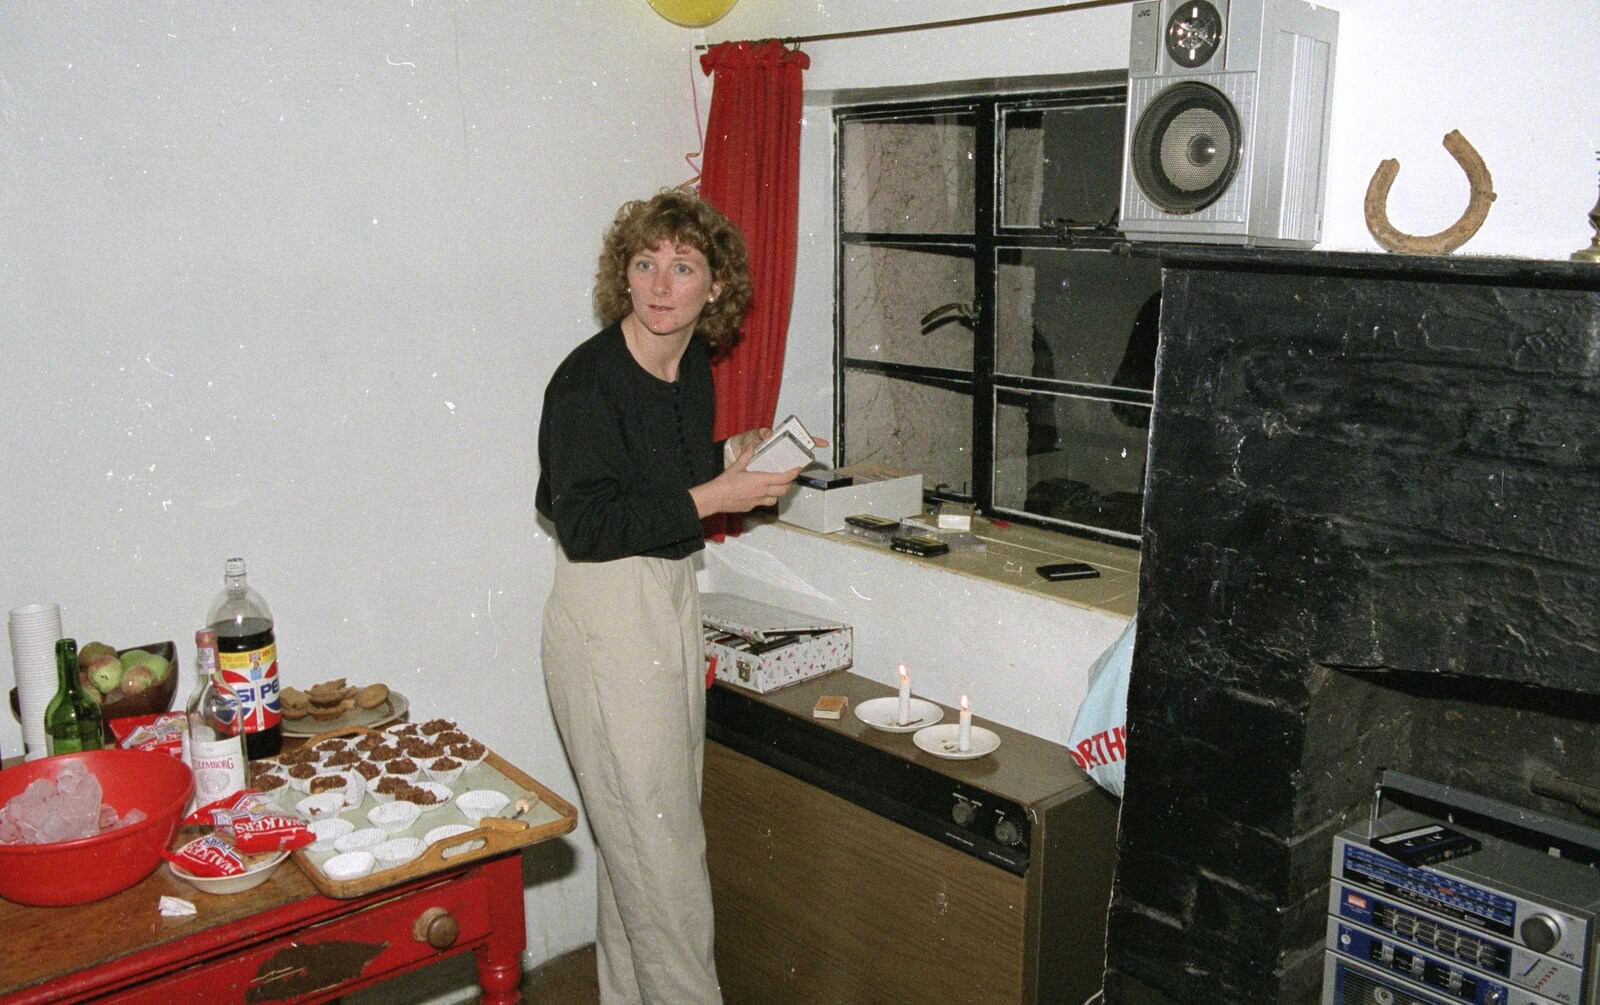 Liz's Party, Abergavenny, Monmouthshire, Wales - 4th August 1990: The DJ checks her tapes (yes, cassette tapes)